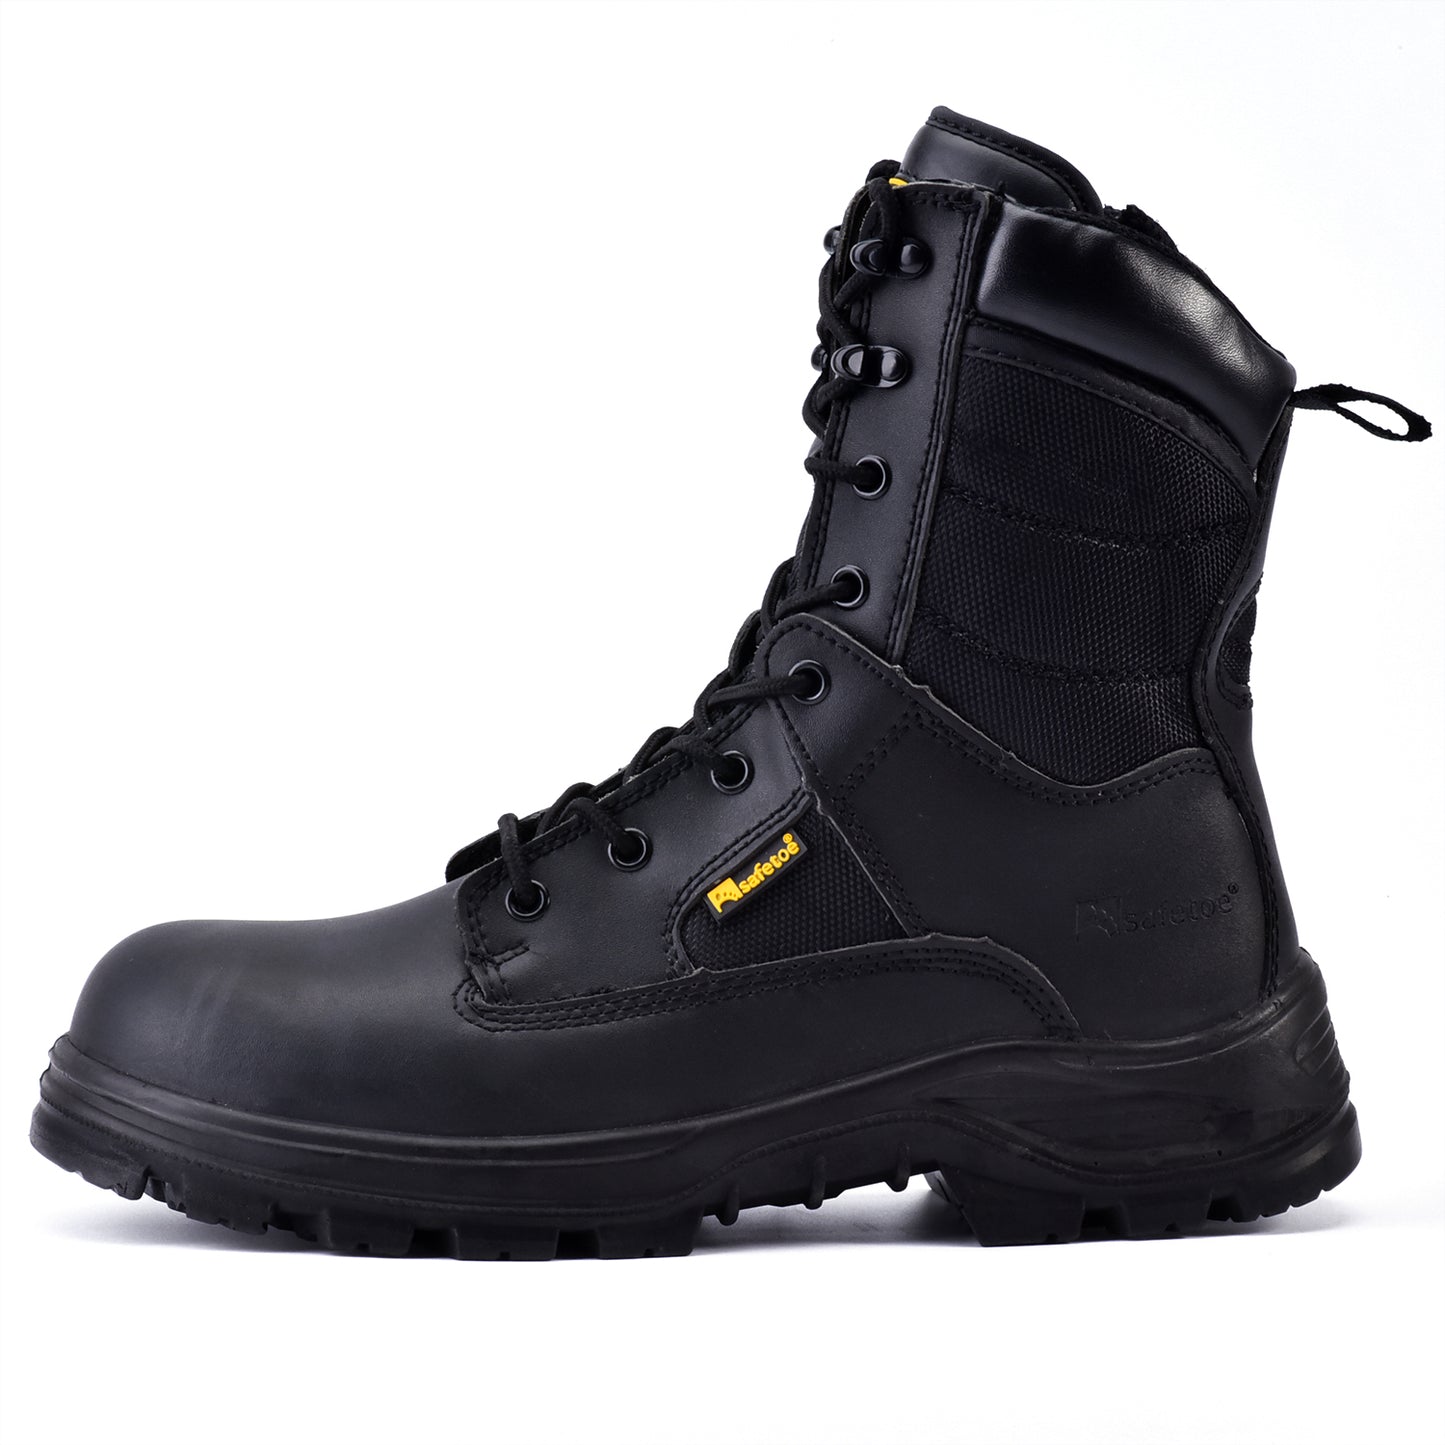 Tracer BK Military Boots